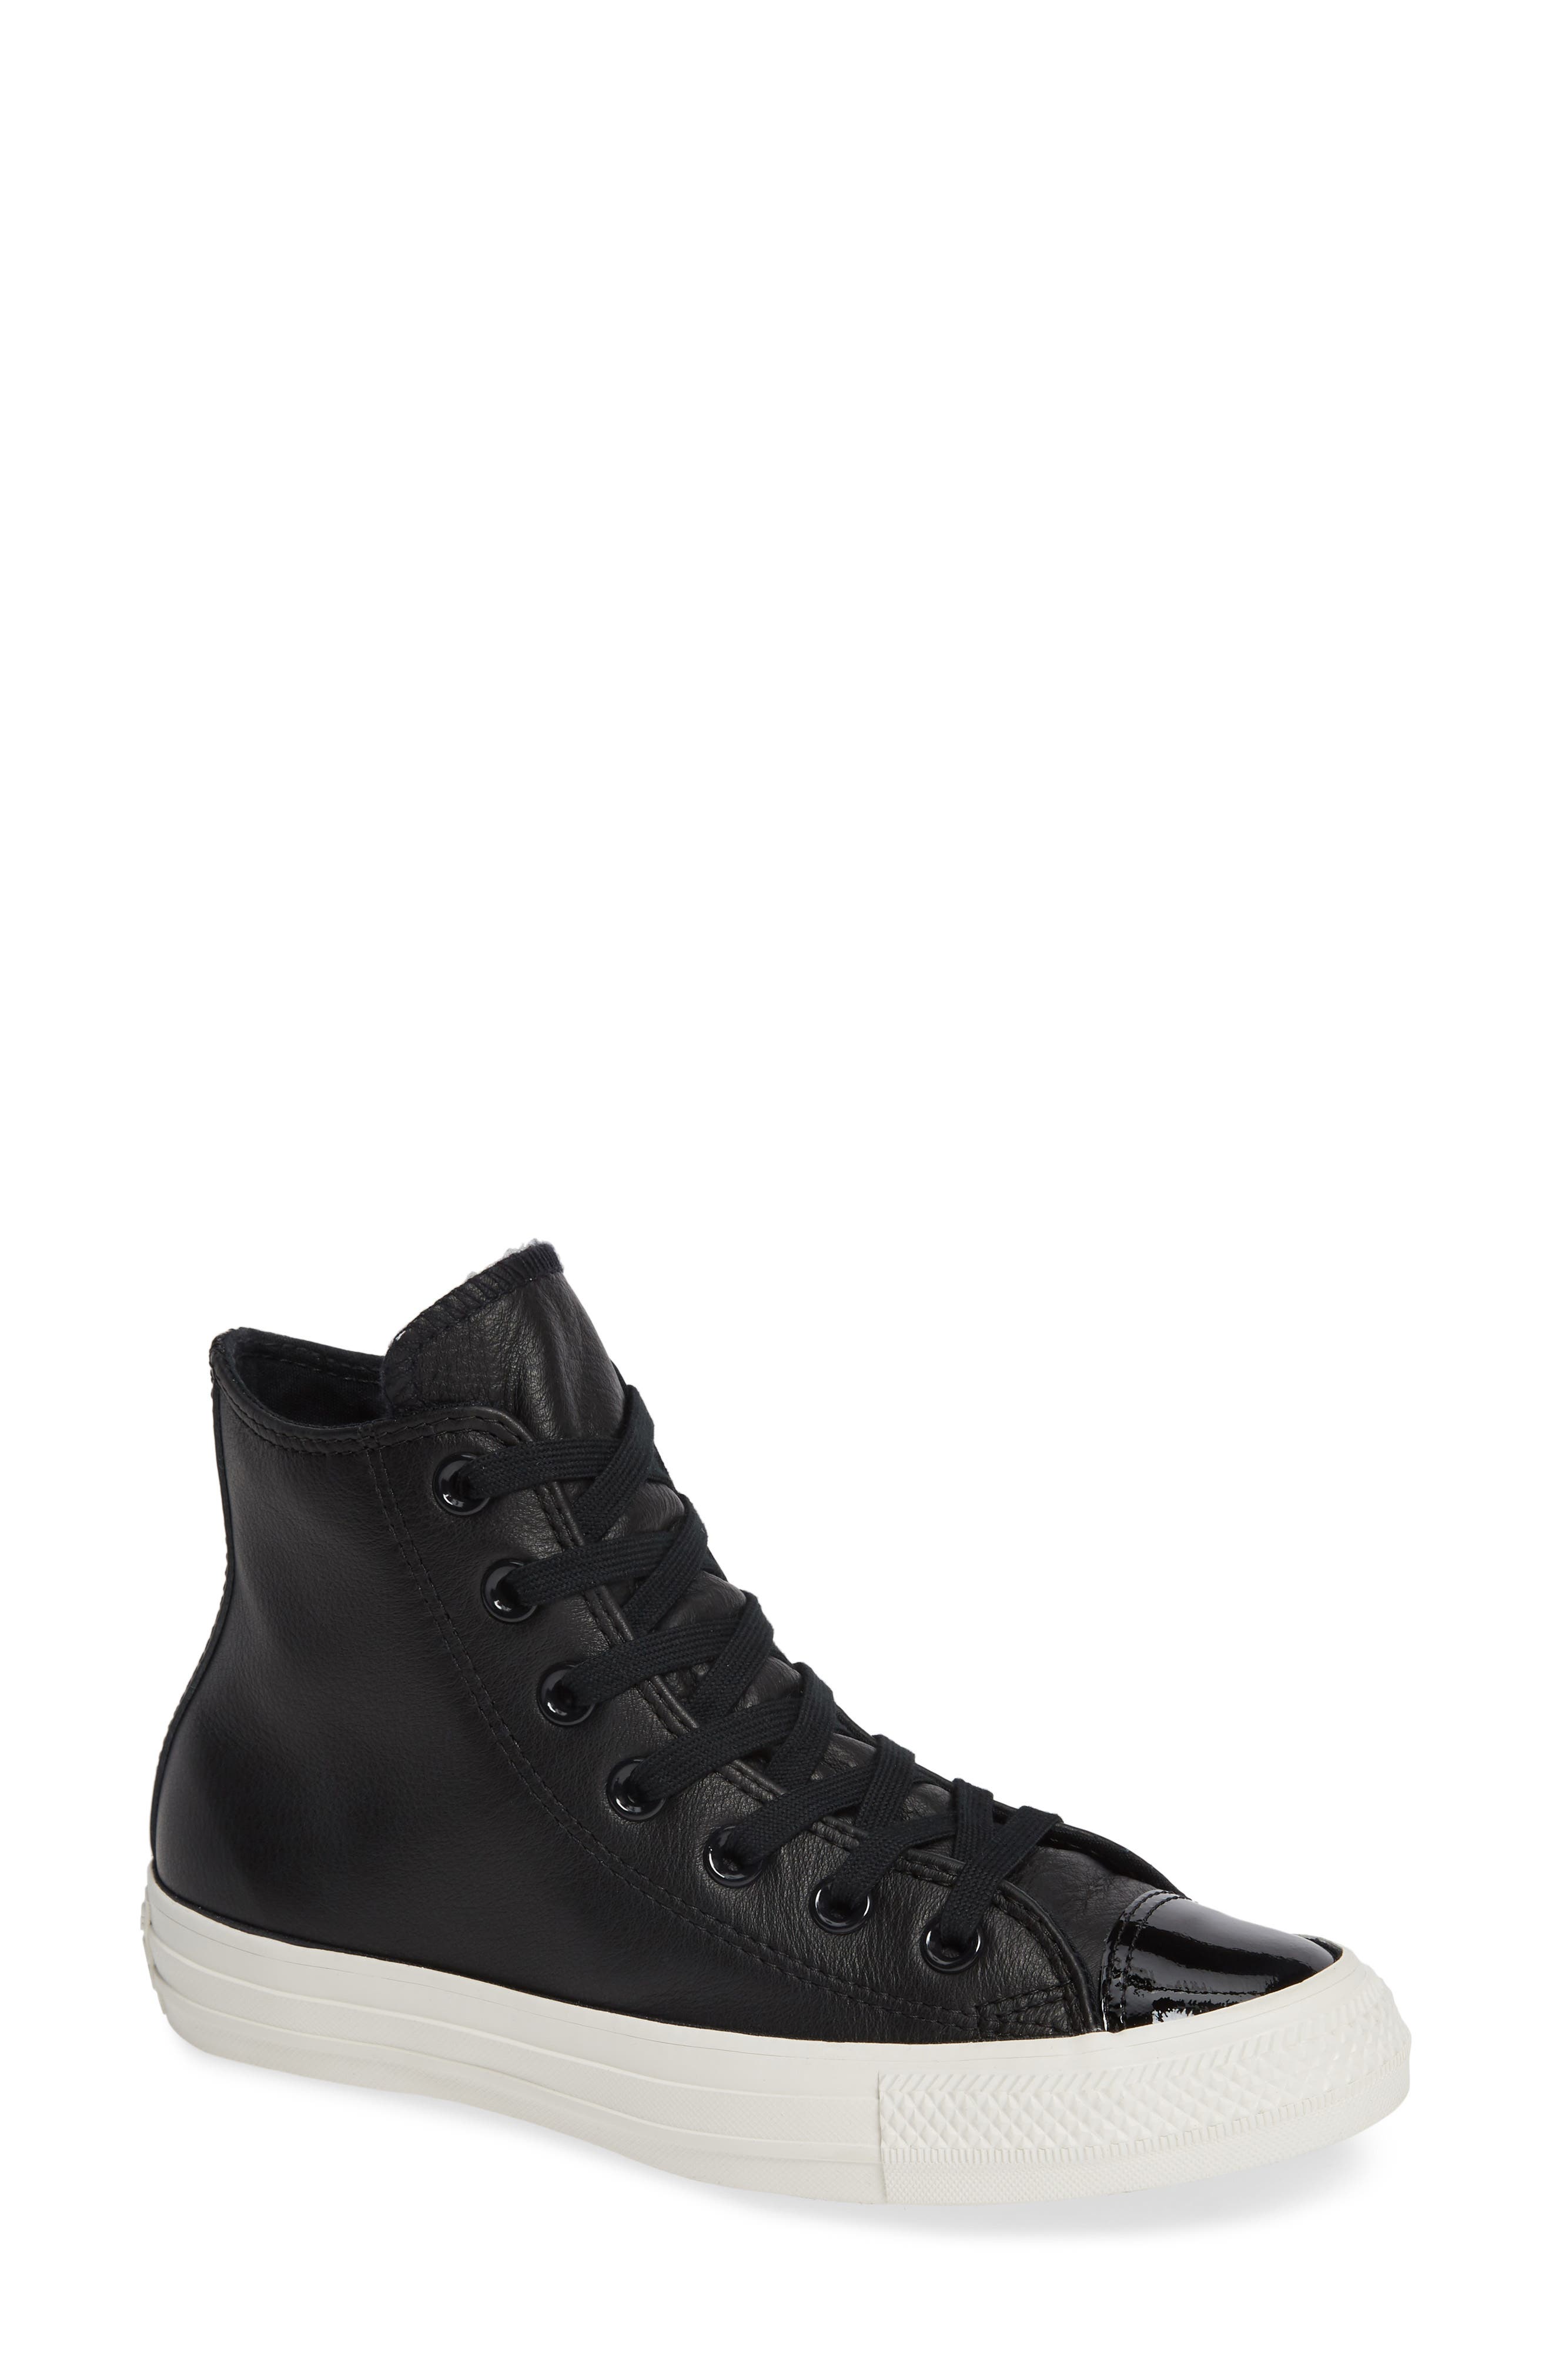 patent leather converse nordstrom